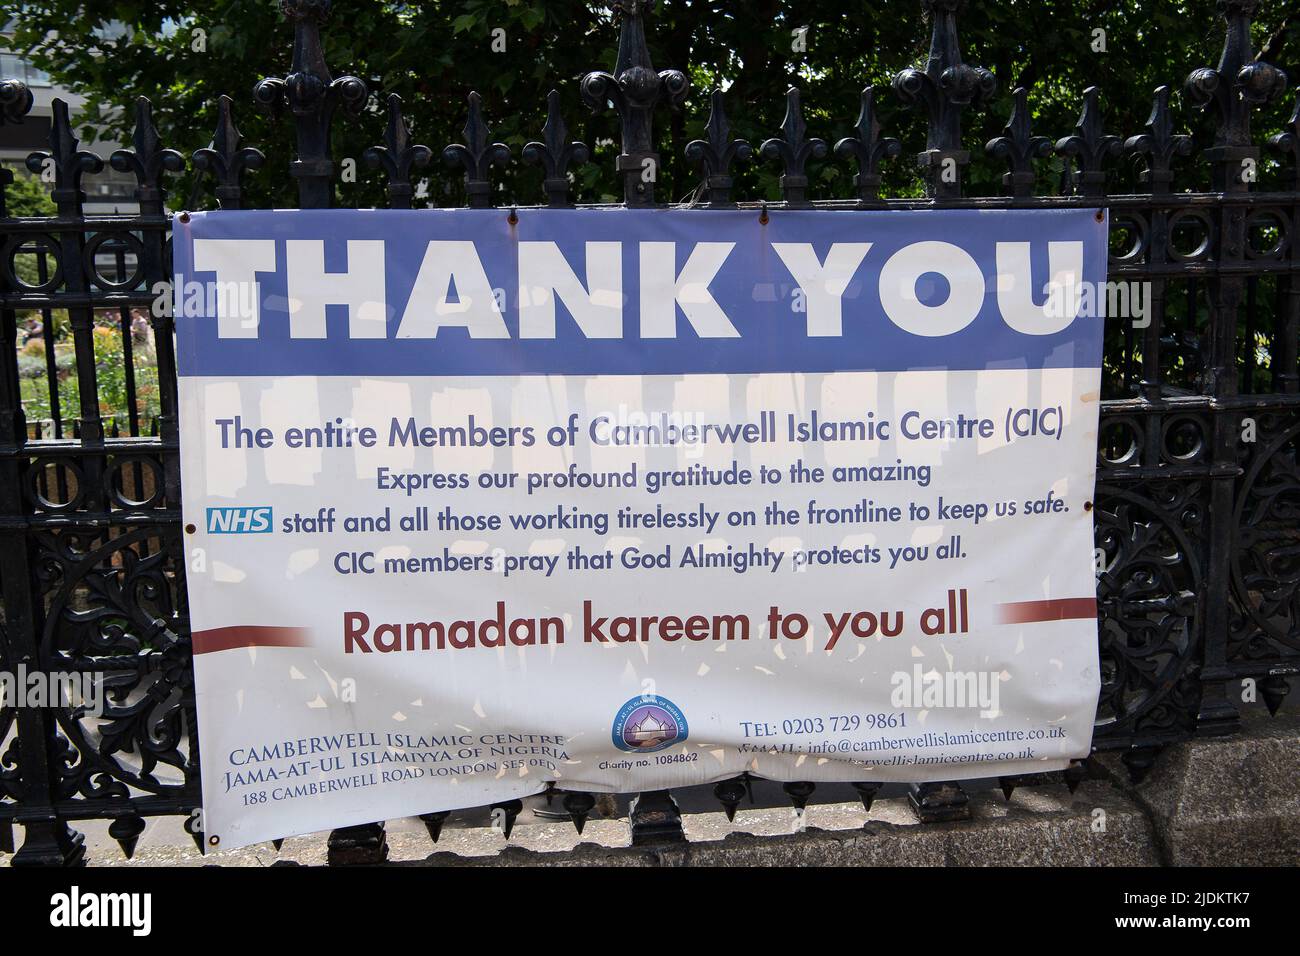 Westminster, London, UK. 8th June, 2022. A Covid-19 Thank You message outside St Thomas's Hospital from the Camberwell Islamic Centre. Credit: Maureen McLean/Alamy Stock Photo